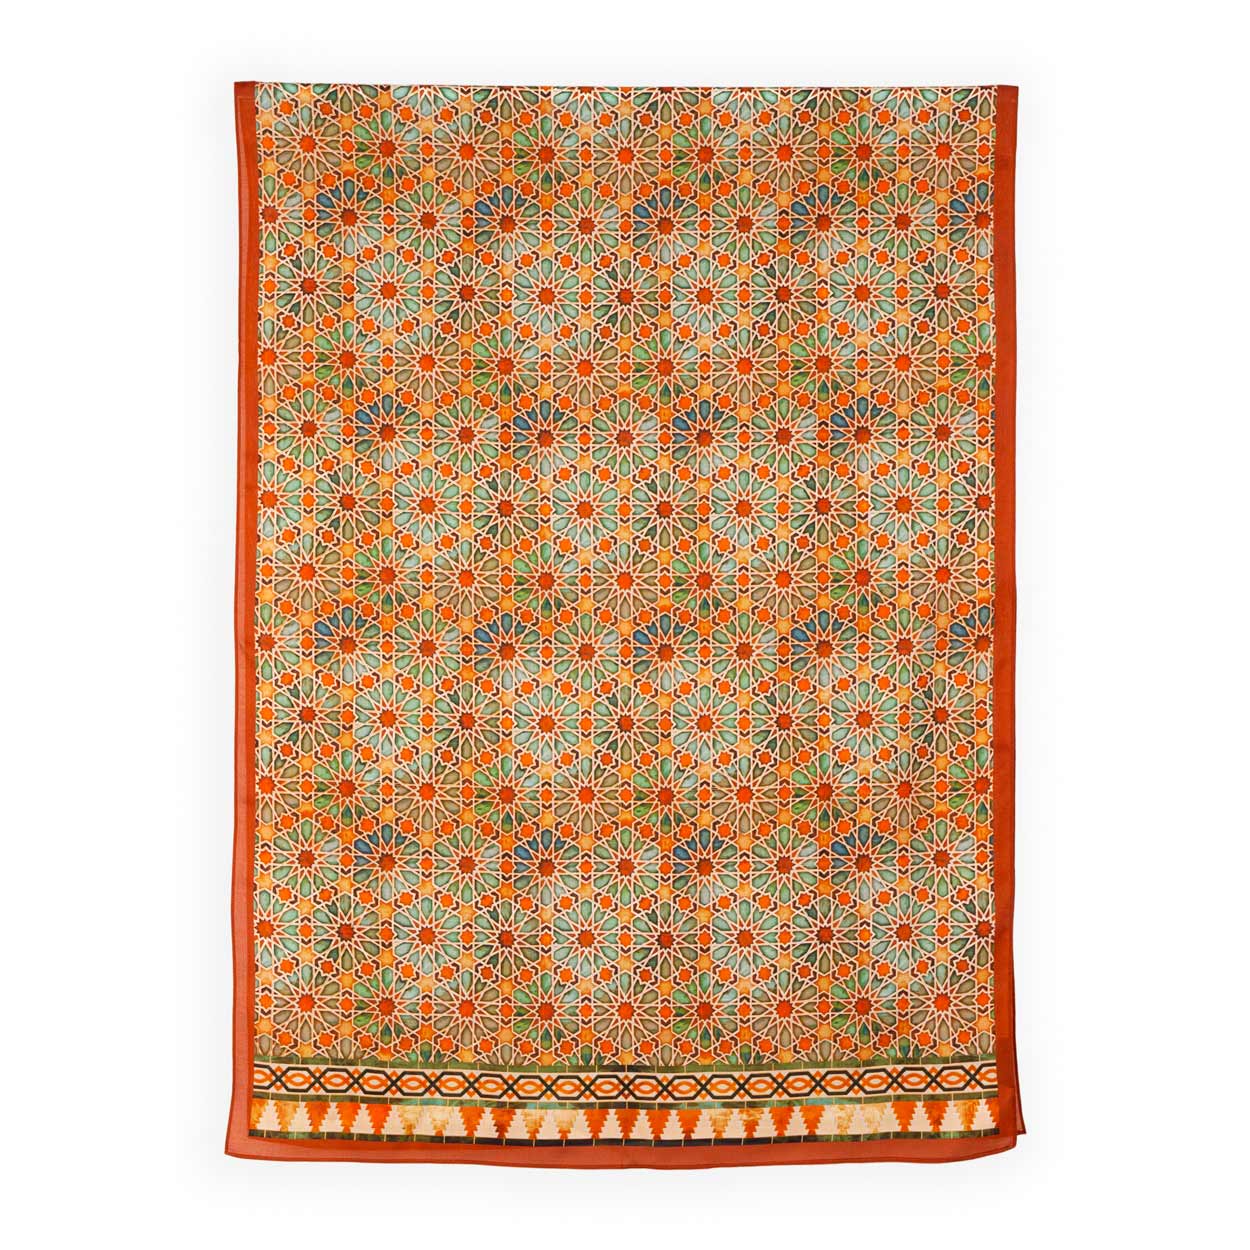 Large orange scarf for women inspired by Alhambra Palace tiles